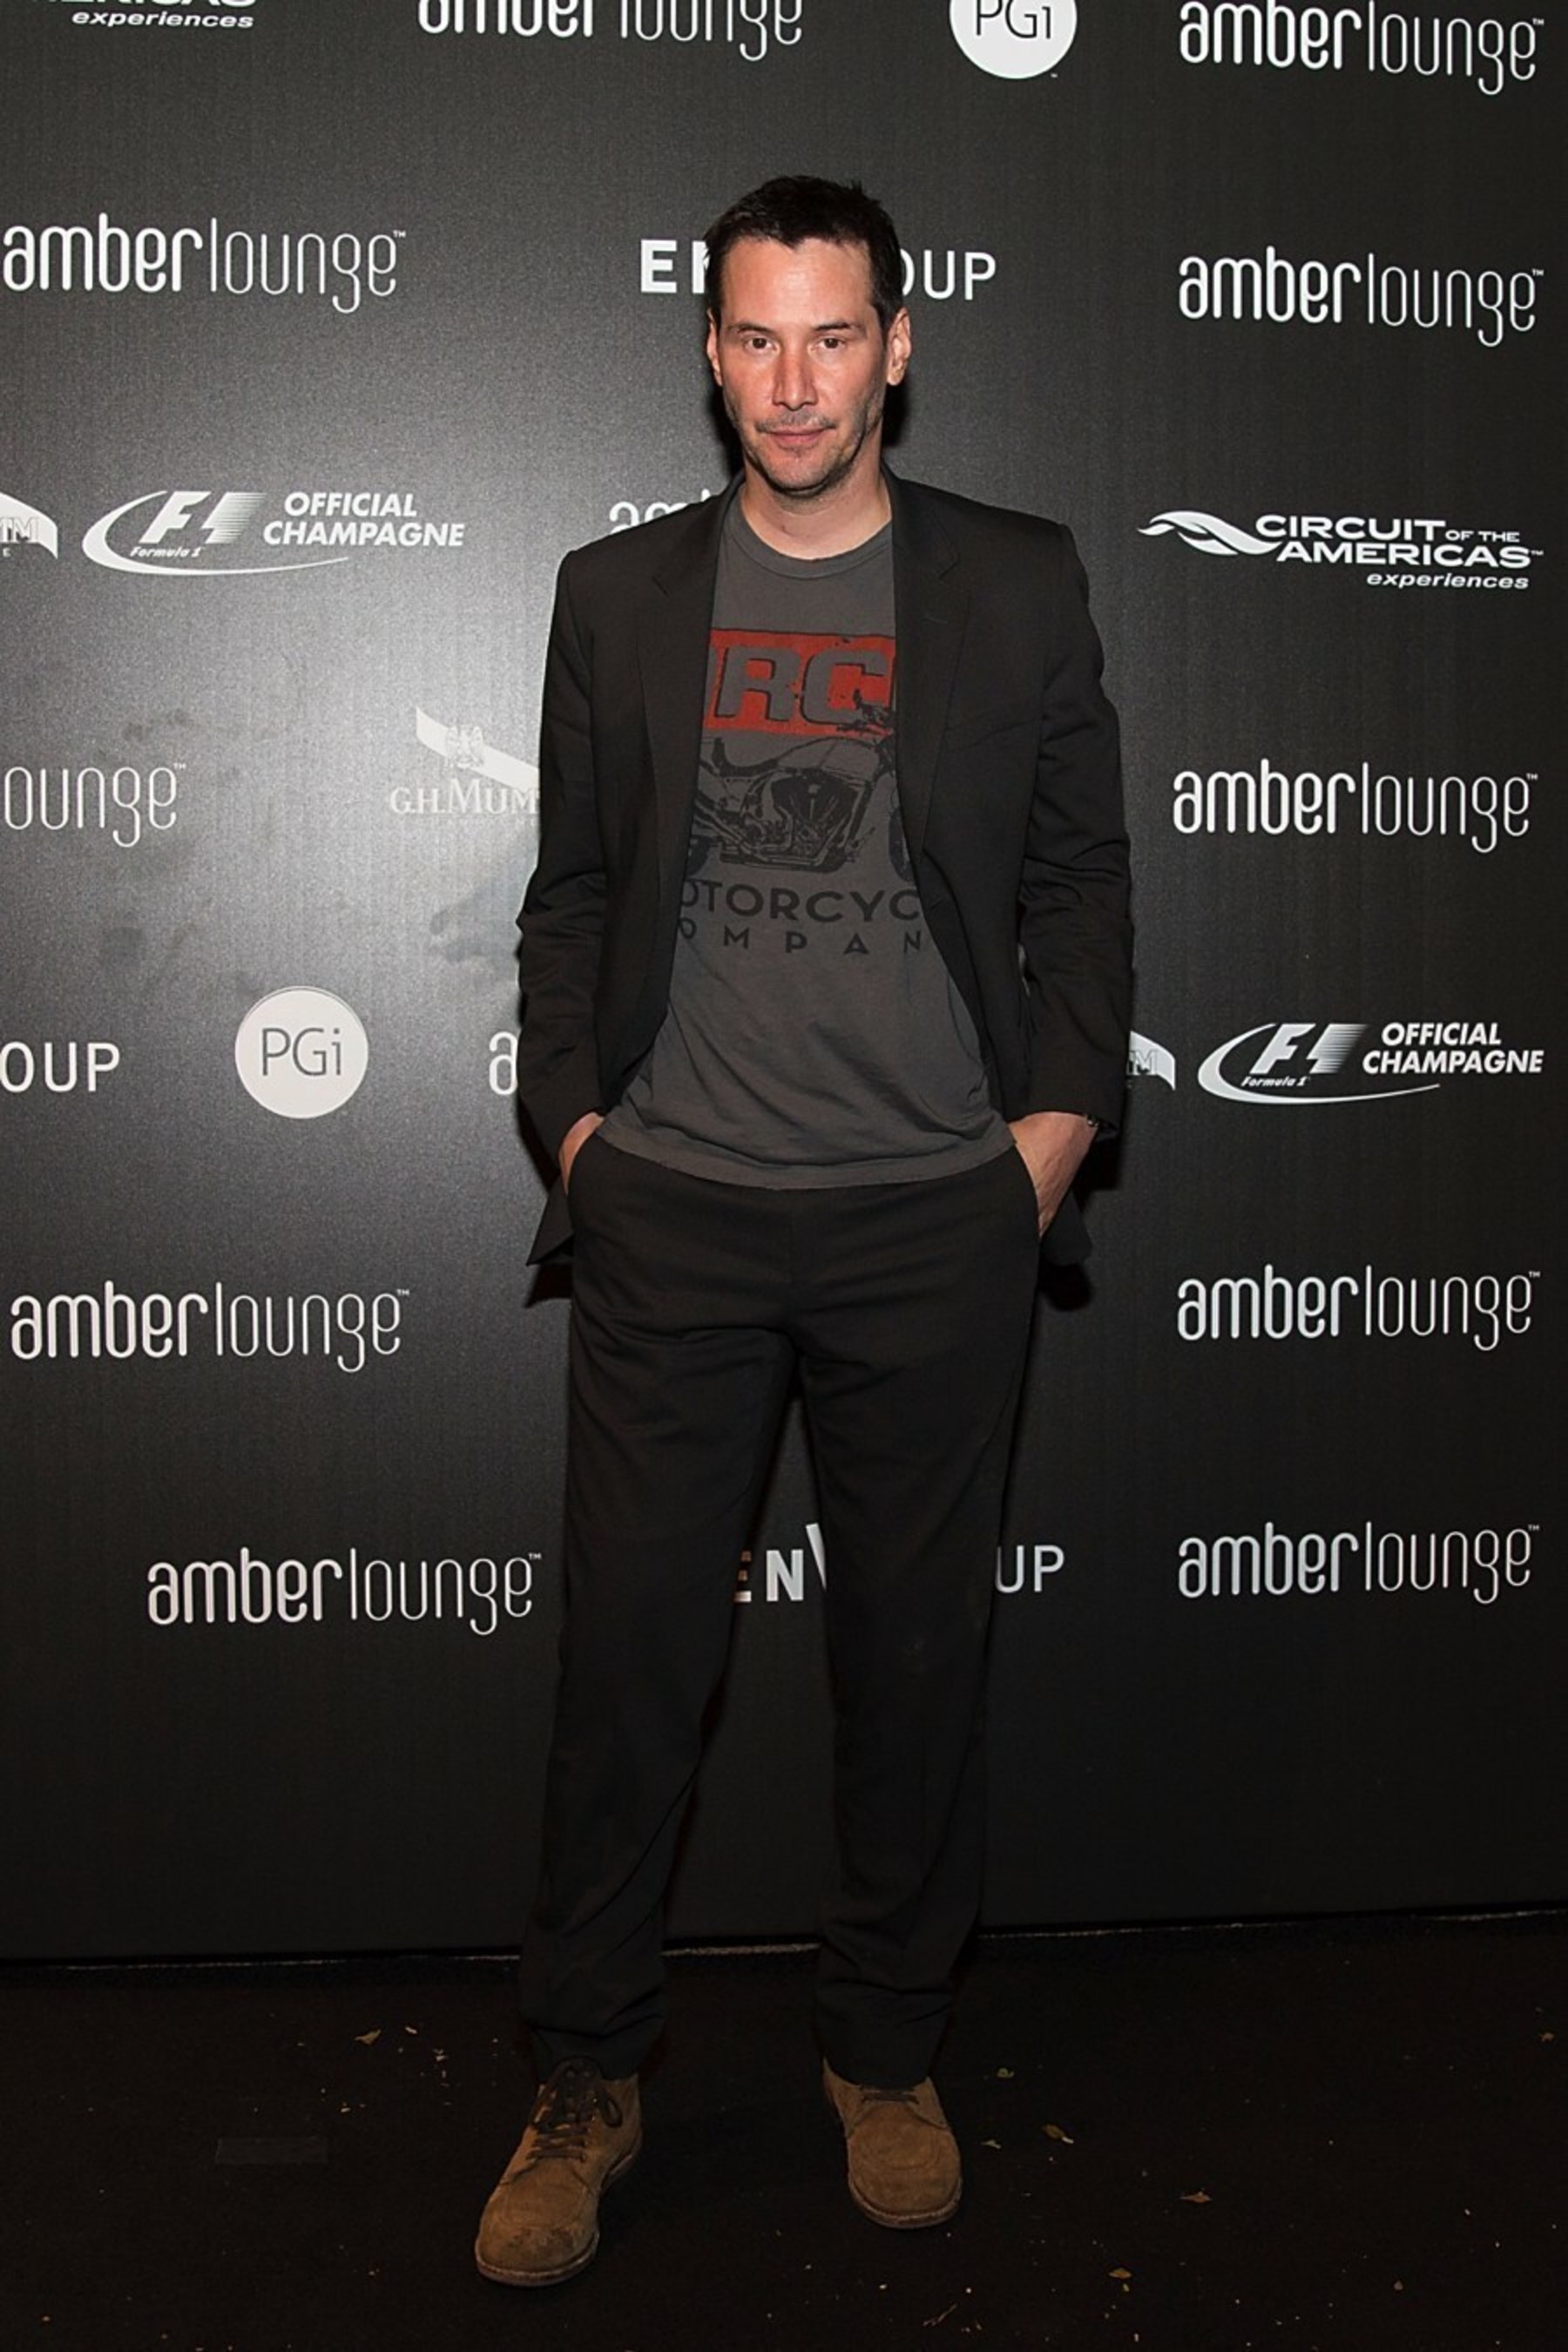 Keanu Reeves celebrates F1 at the Original F1 After-Party hosted by G.H.MUMM at Amber Lounge in Austin, TX. Photo Credit: Getty Image for G.H.MUMM